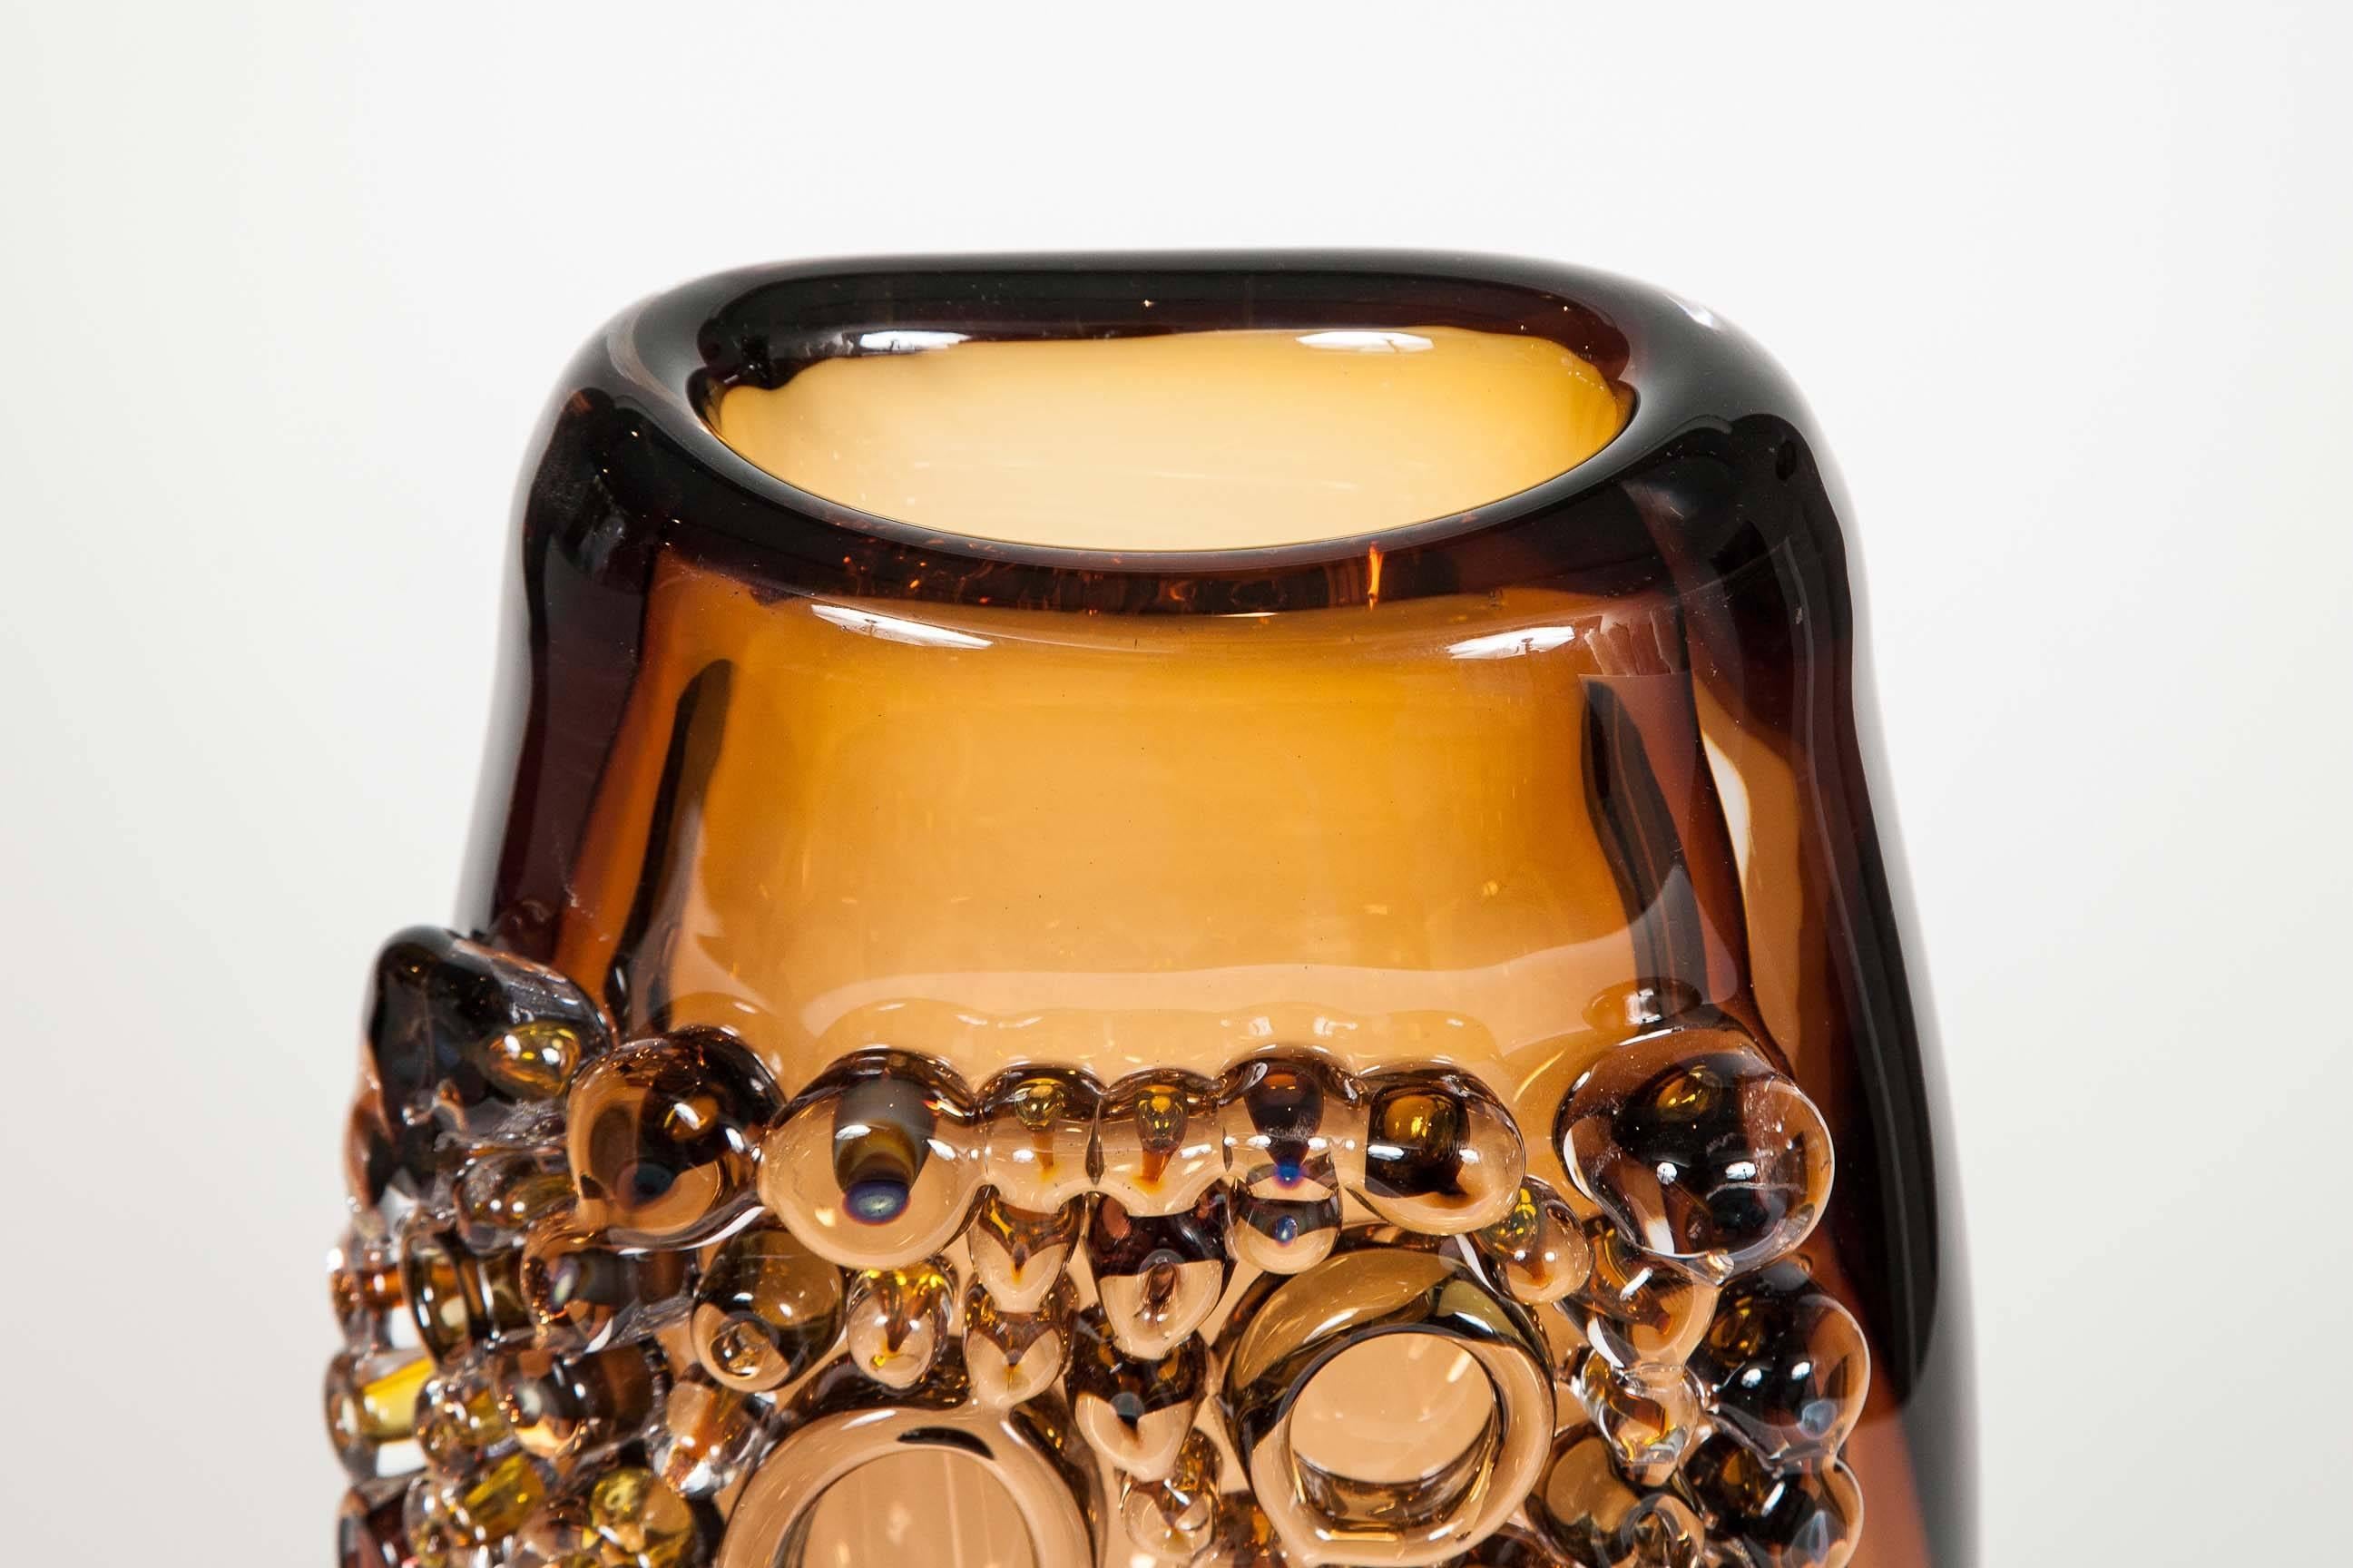 Hand-Crafted Tube Field Amber, High Shape II, a unique amber glass art work by Sabine Lintzen